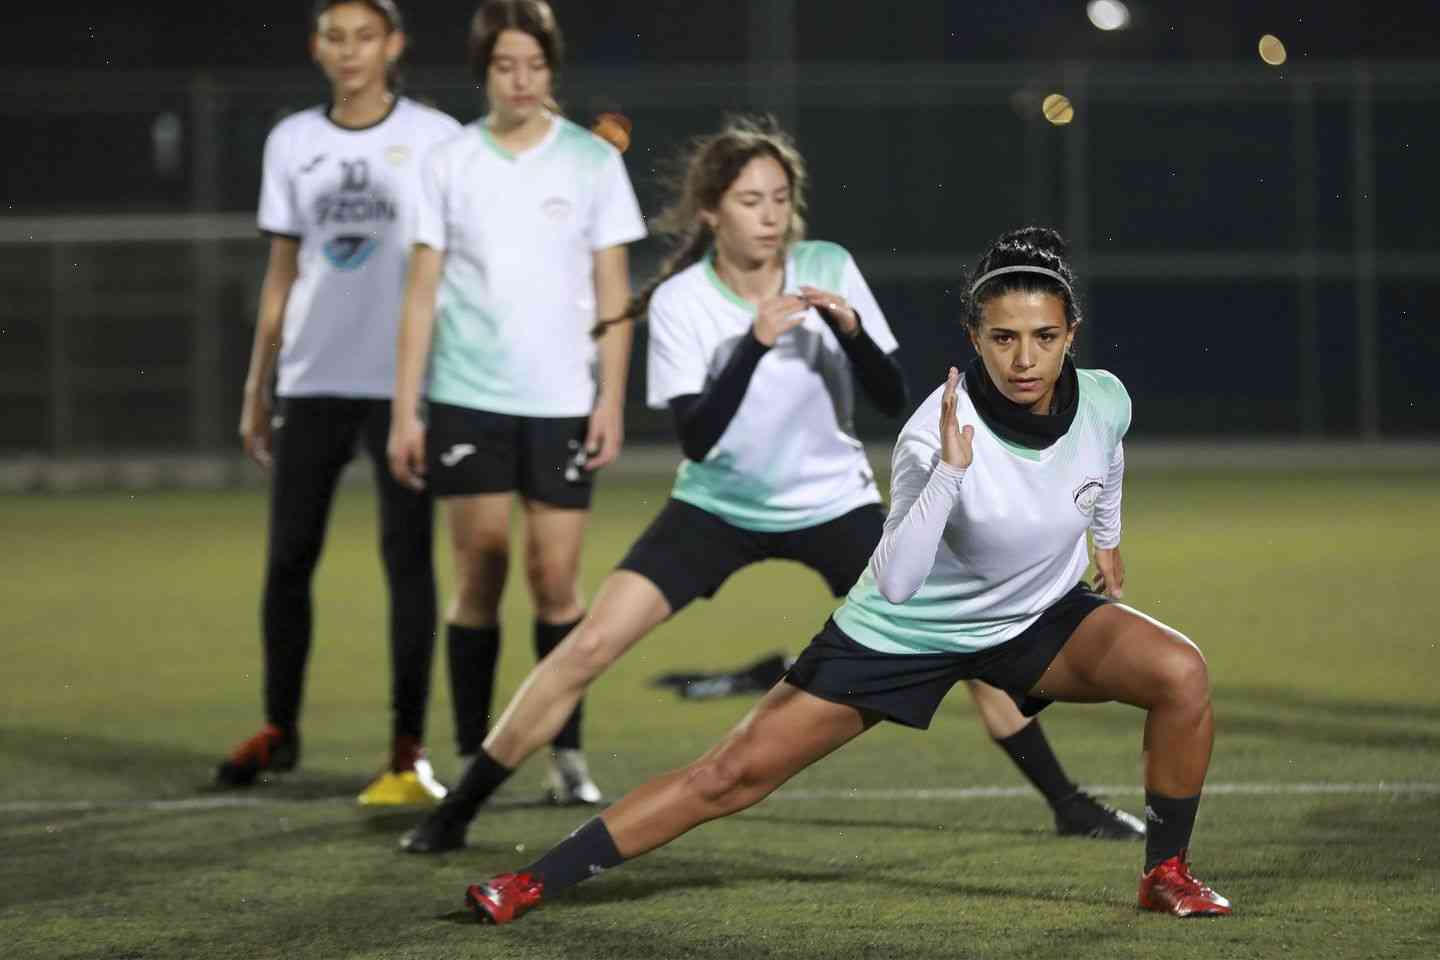 Women’s Soccer in the Middle East